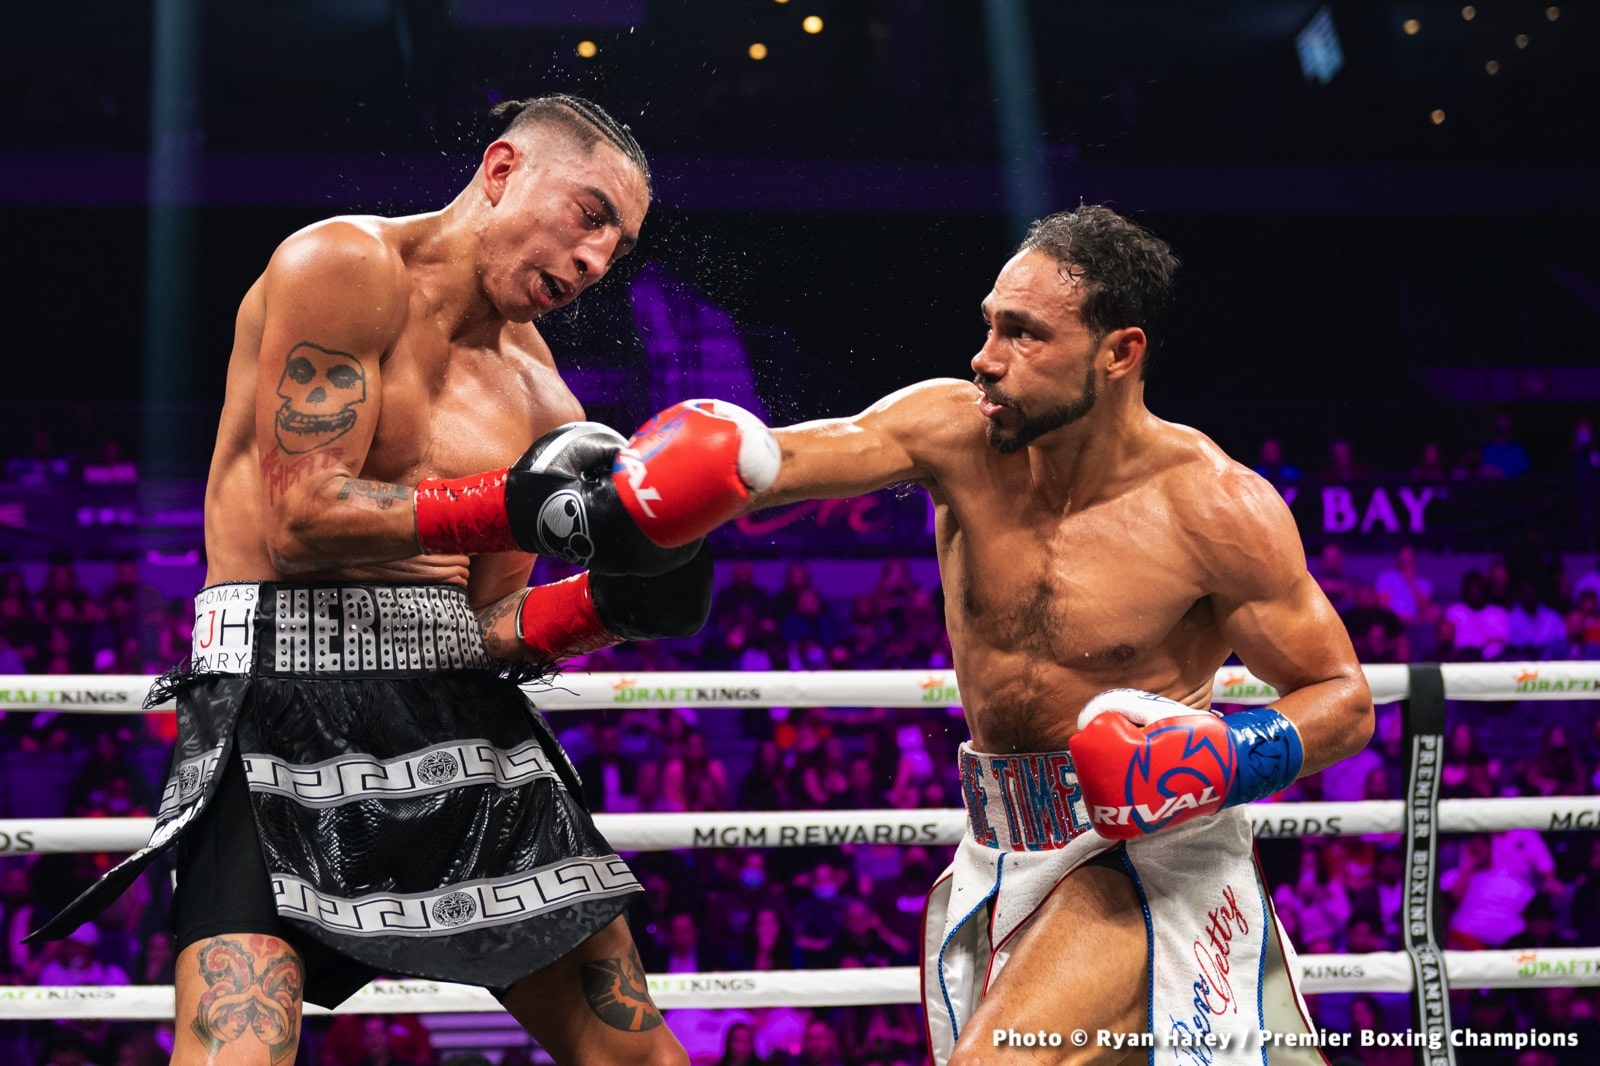 Keith Thurman shines in victory over Mario Barrios - Boxing Results